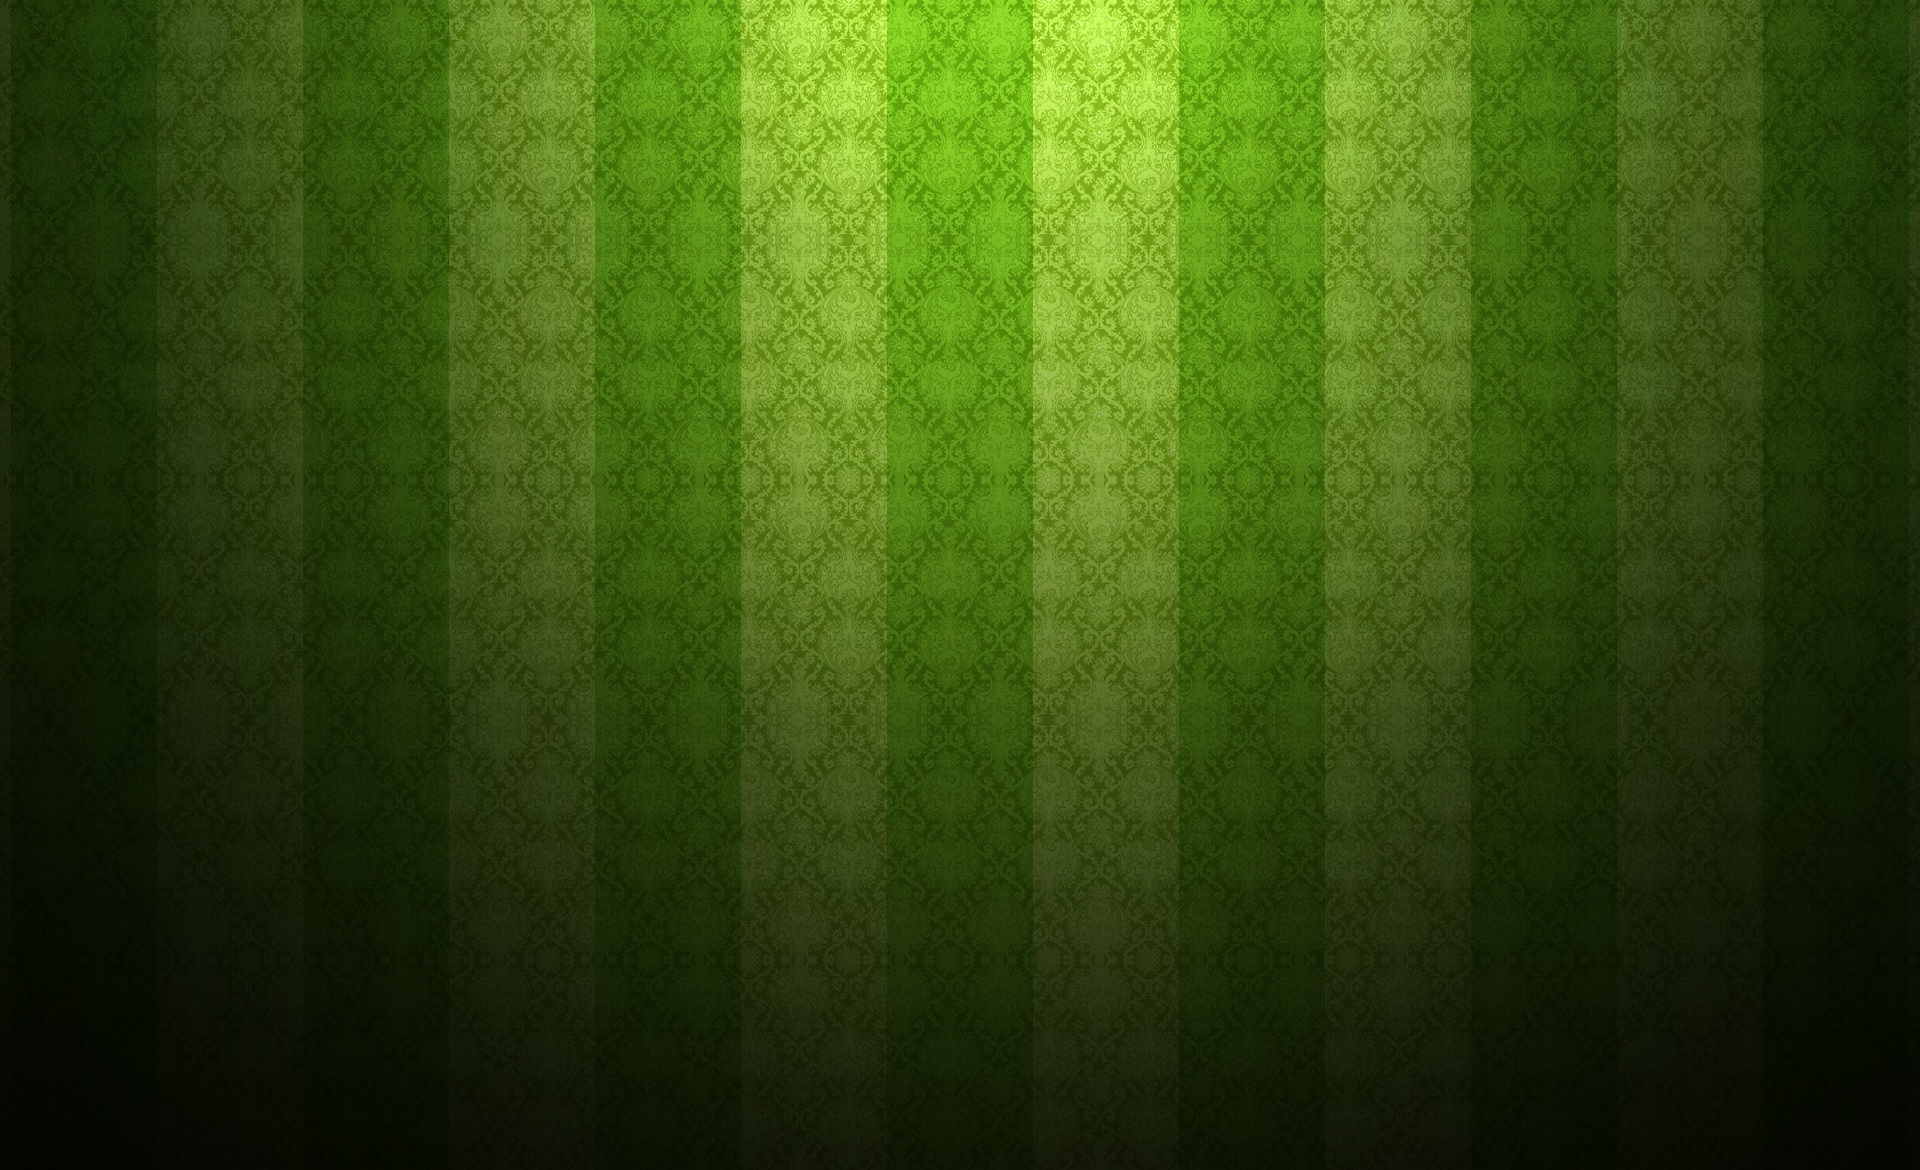 Pictures background wallpaper texture image pattern green green